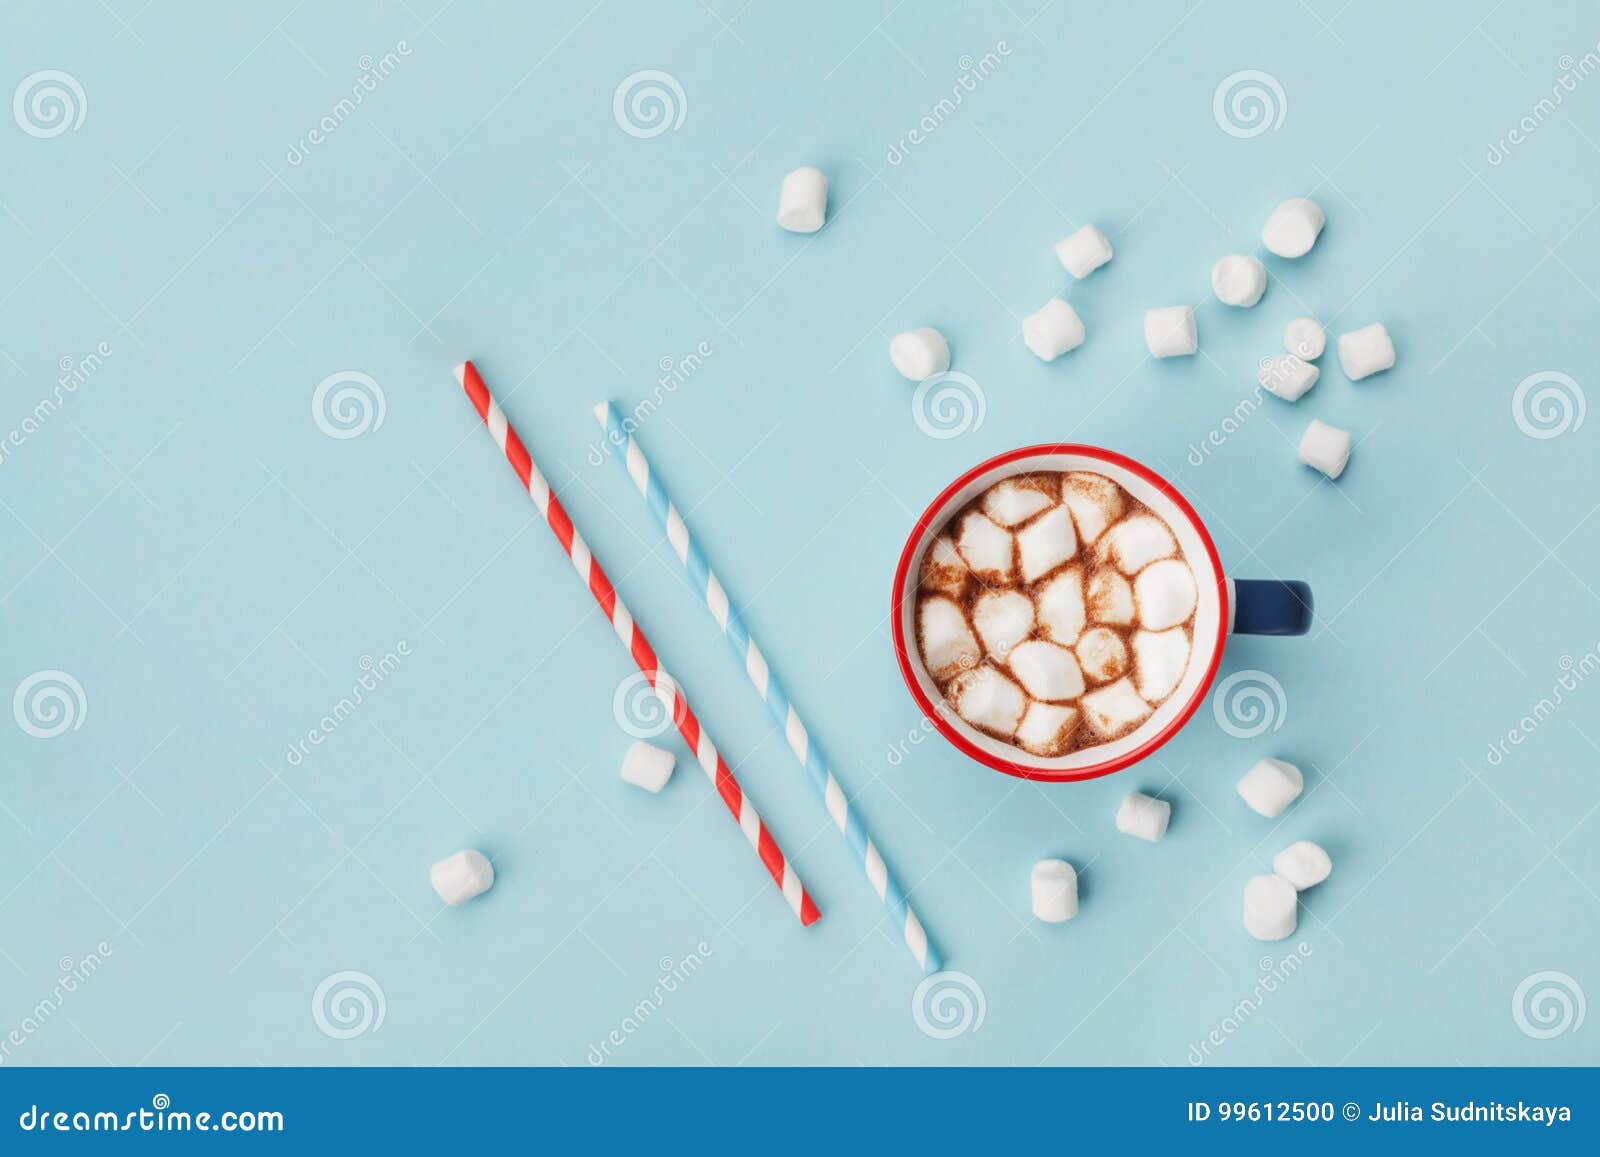 mug of hot cocoa or chocolate and straw on turquoise table top view. flat lay.